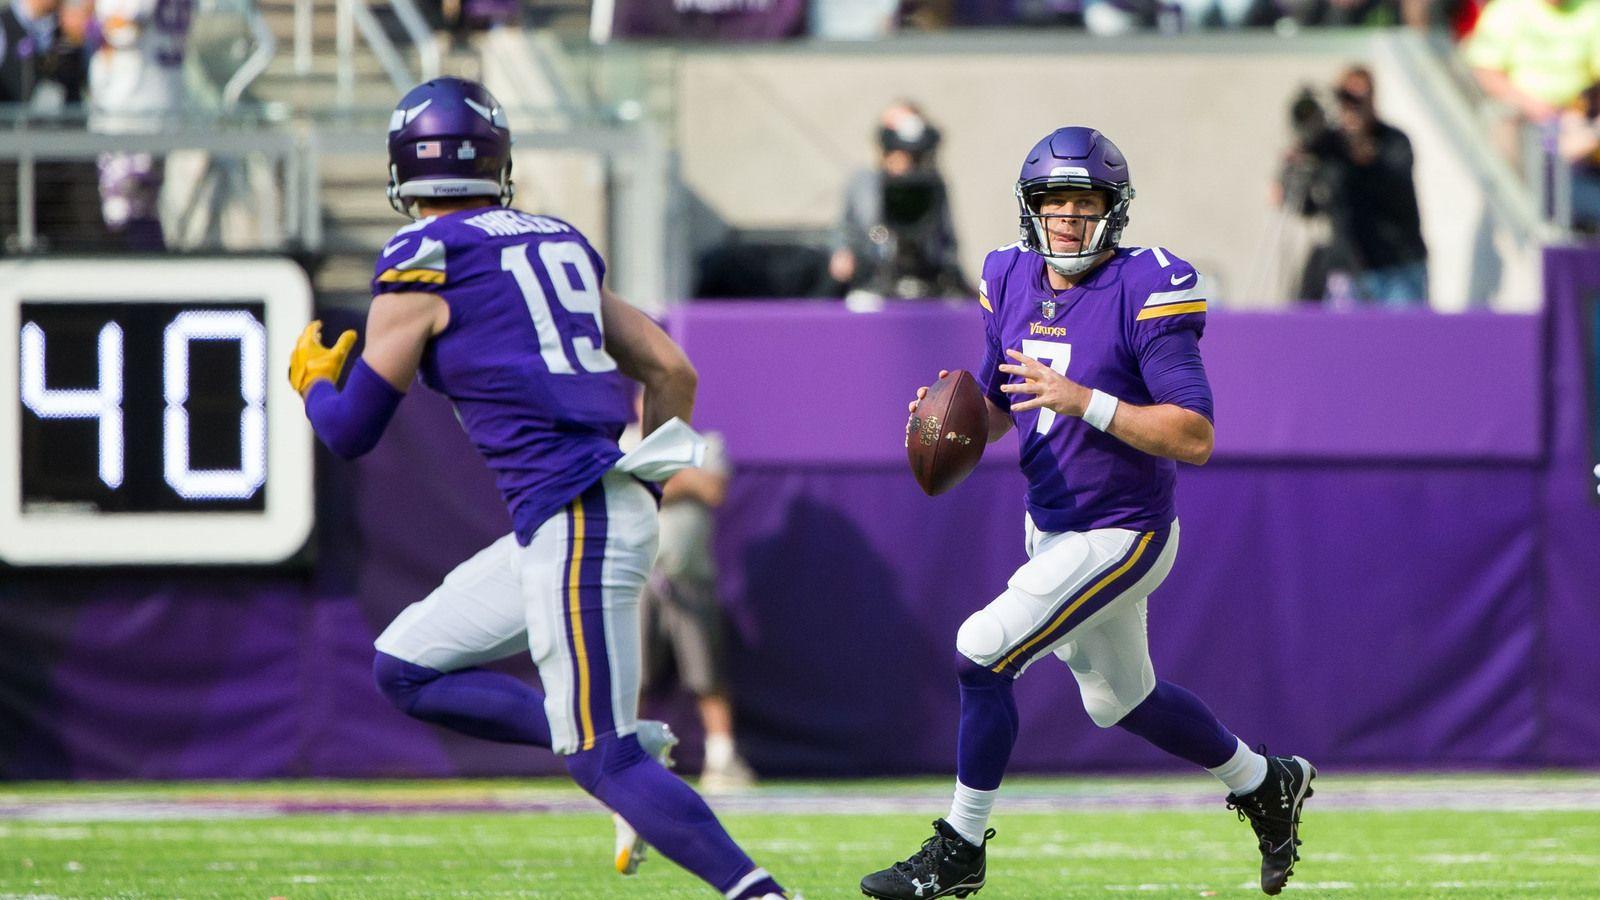 Case Keenum and Adam Thielen making history for Vikings